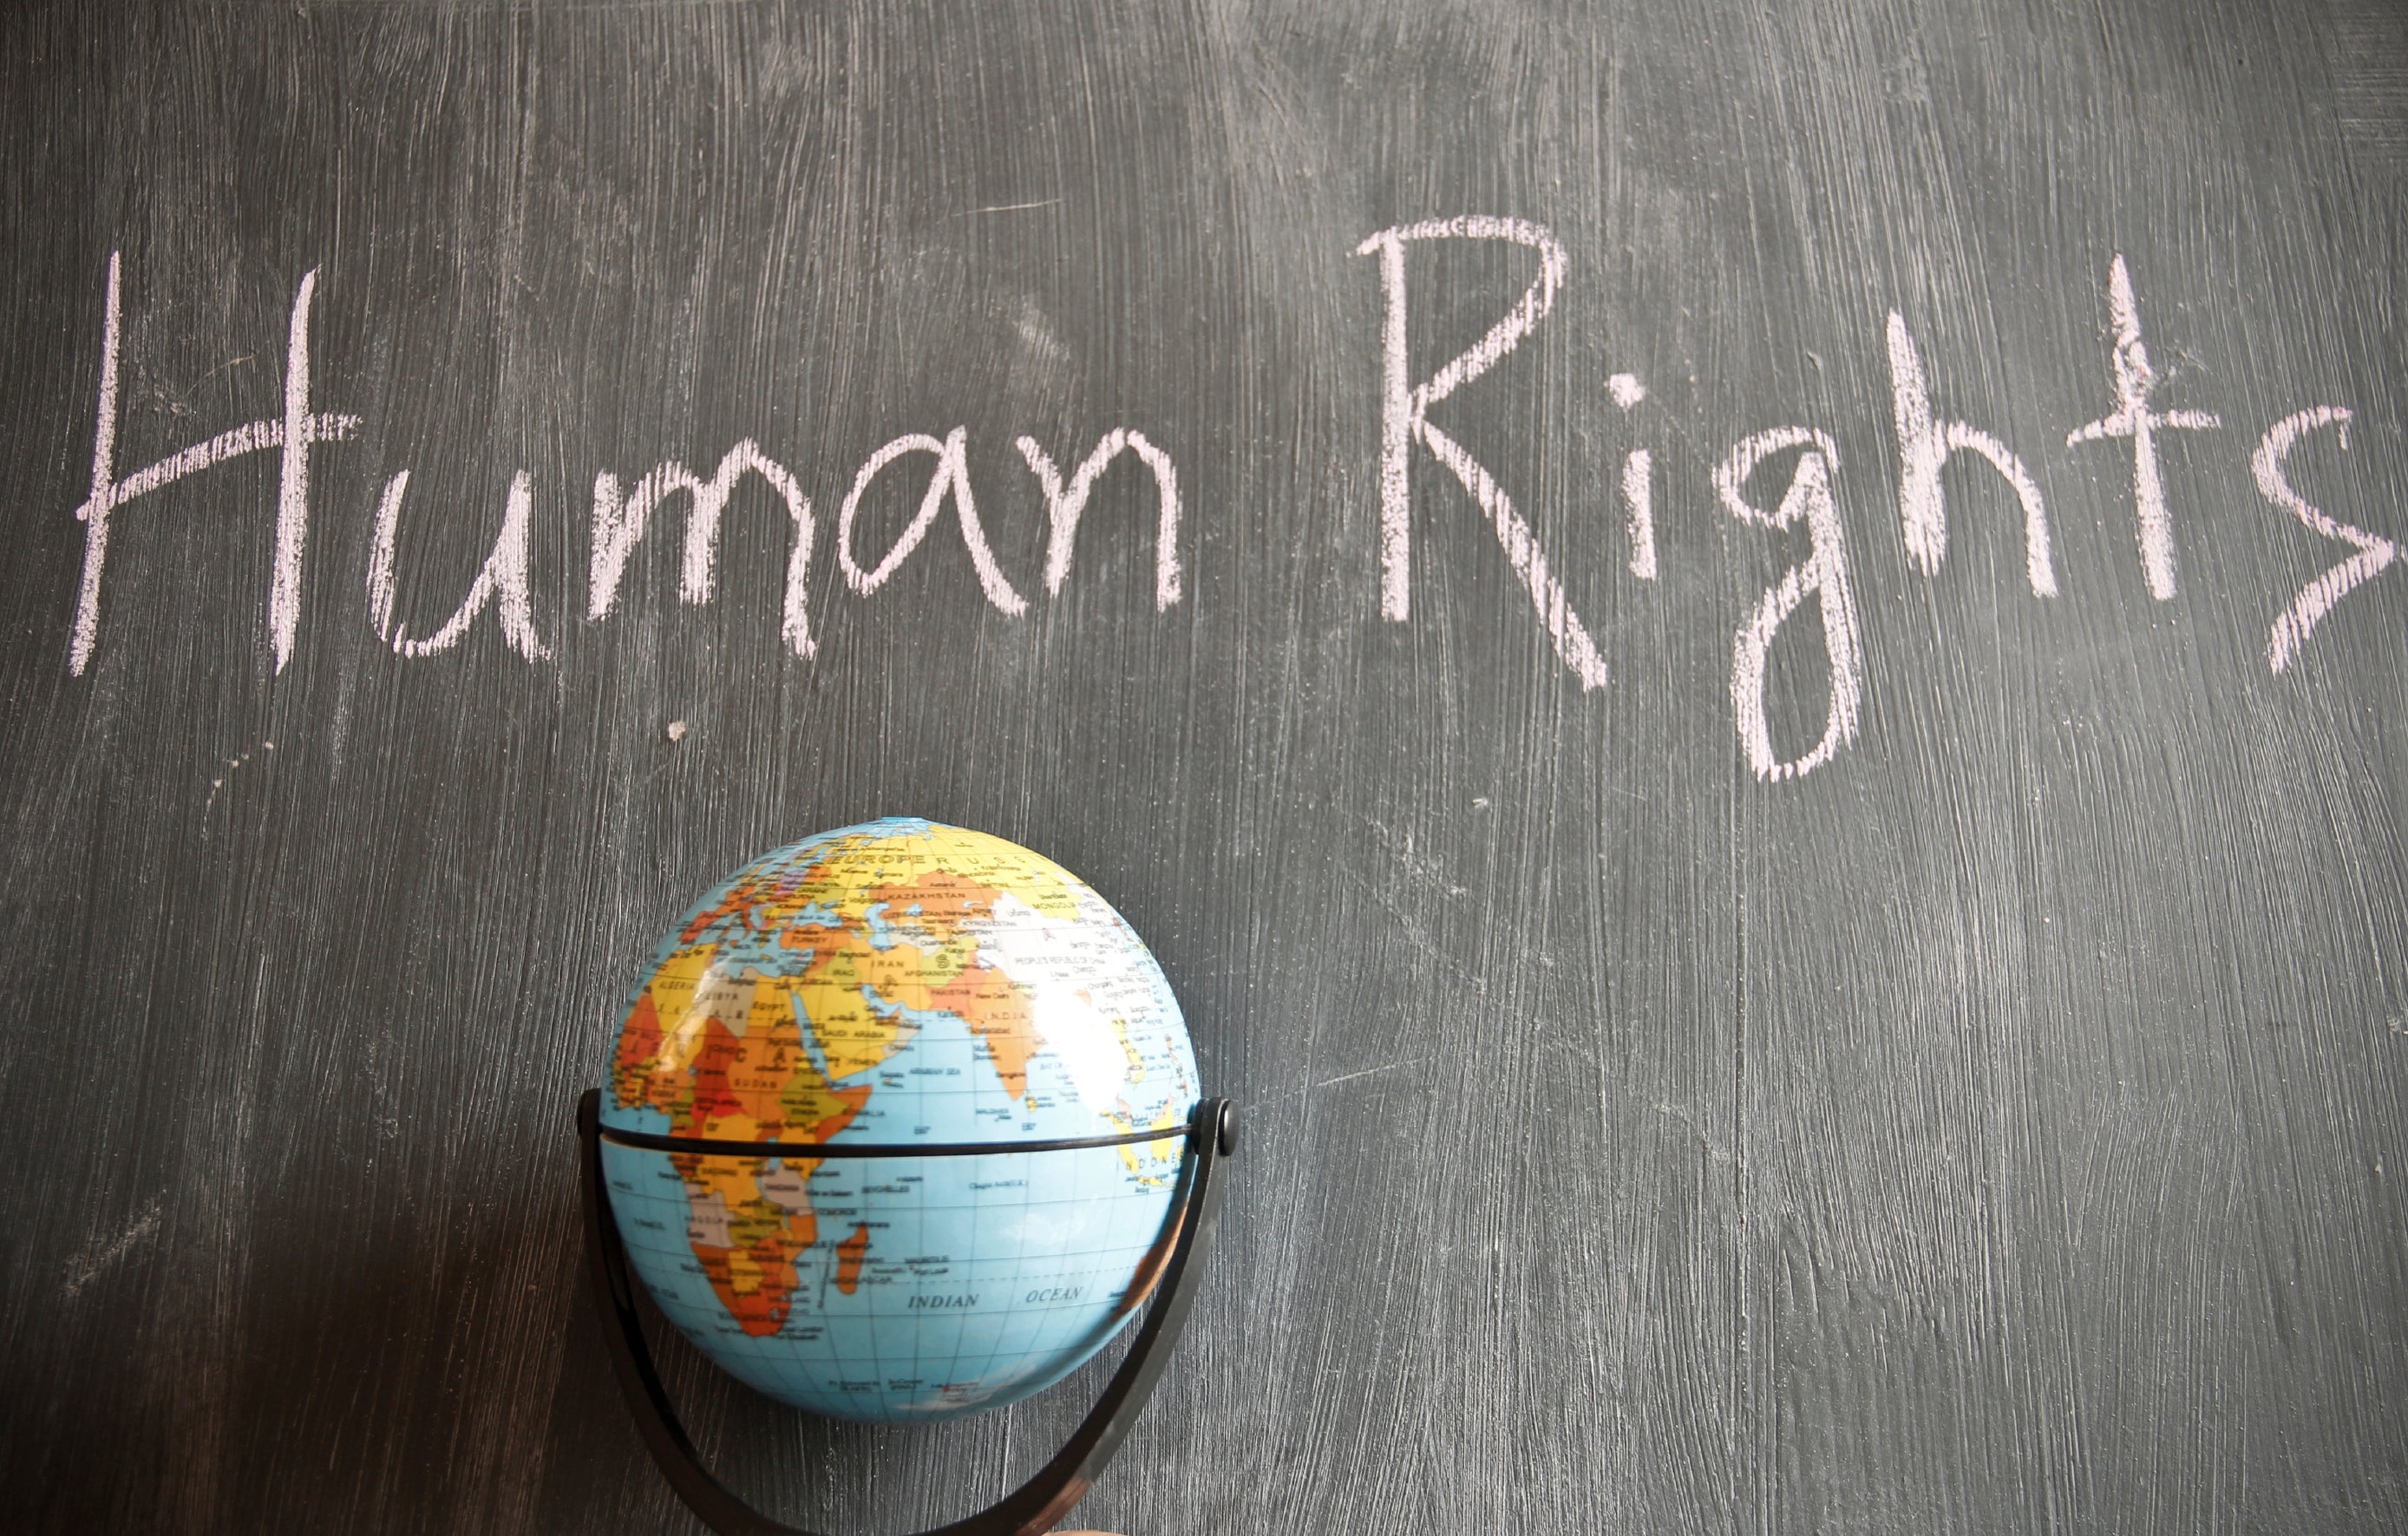 The Problem Of Human Rights